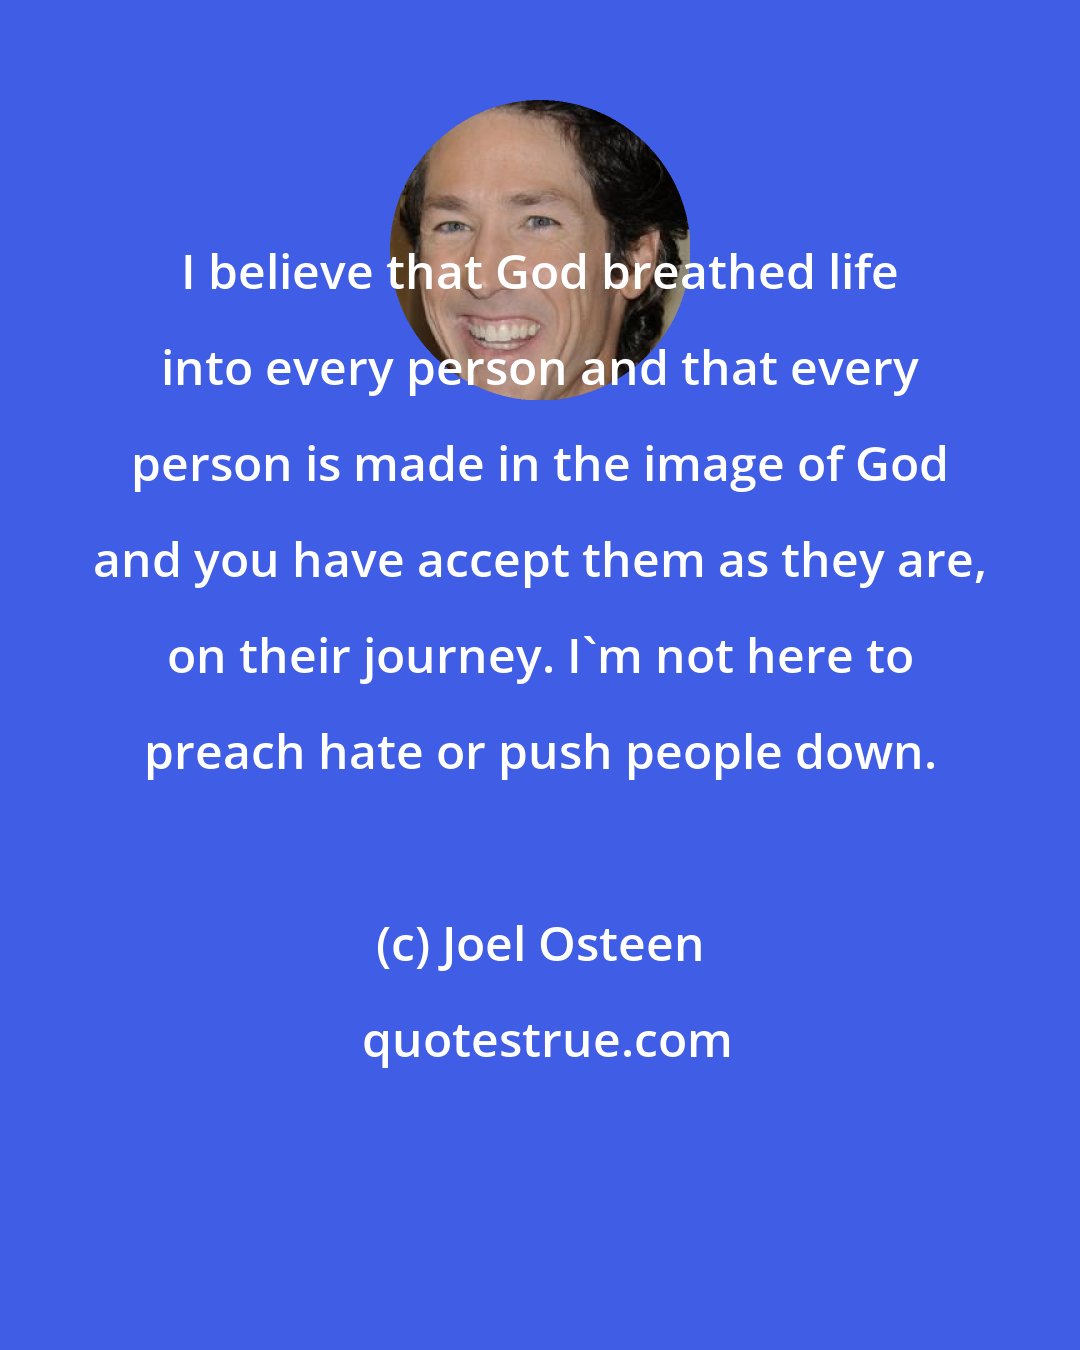 Joel Osteen: I believe that God breathed life into every person and that every person is made in the image of God and you have accept them as they are, on their journey. I'm not here to preach hate or push people down.